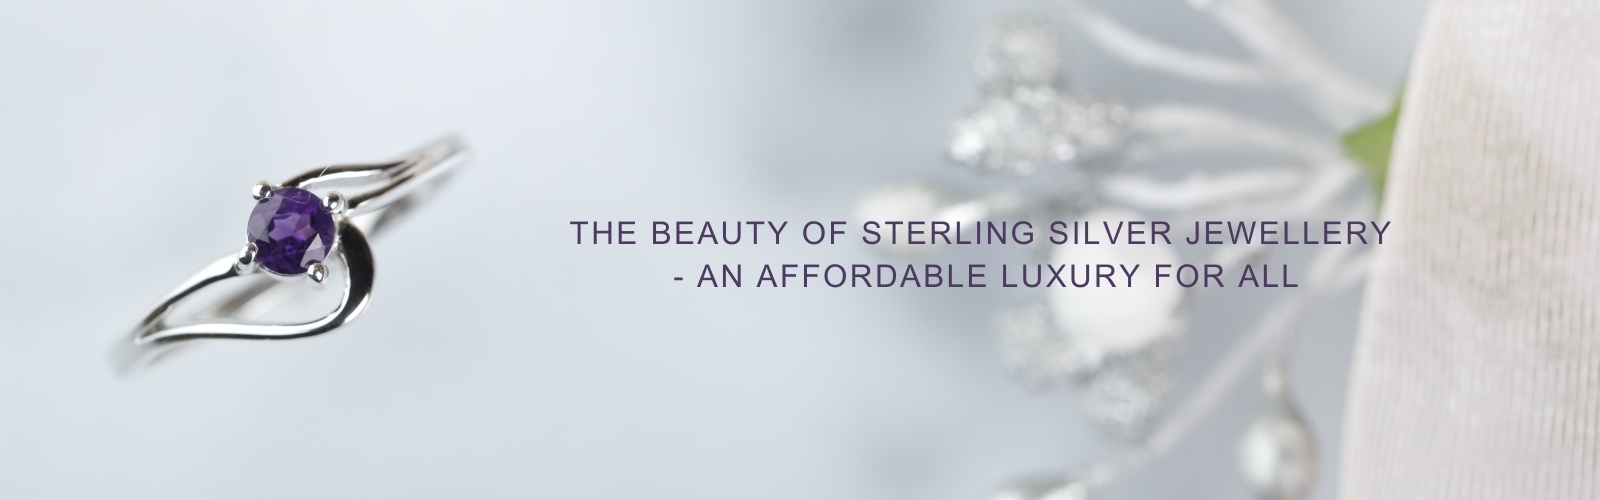 the beauty of sterling silver jewellery an affordable luxury for all